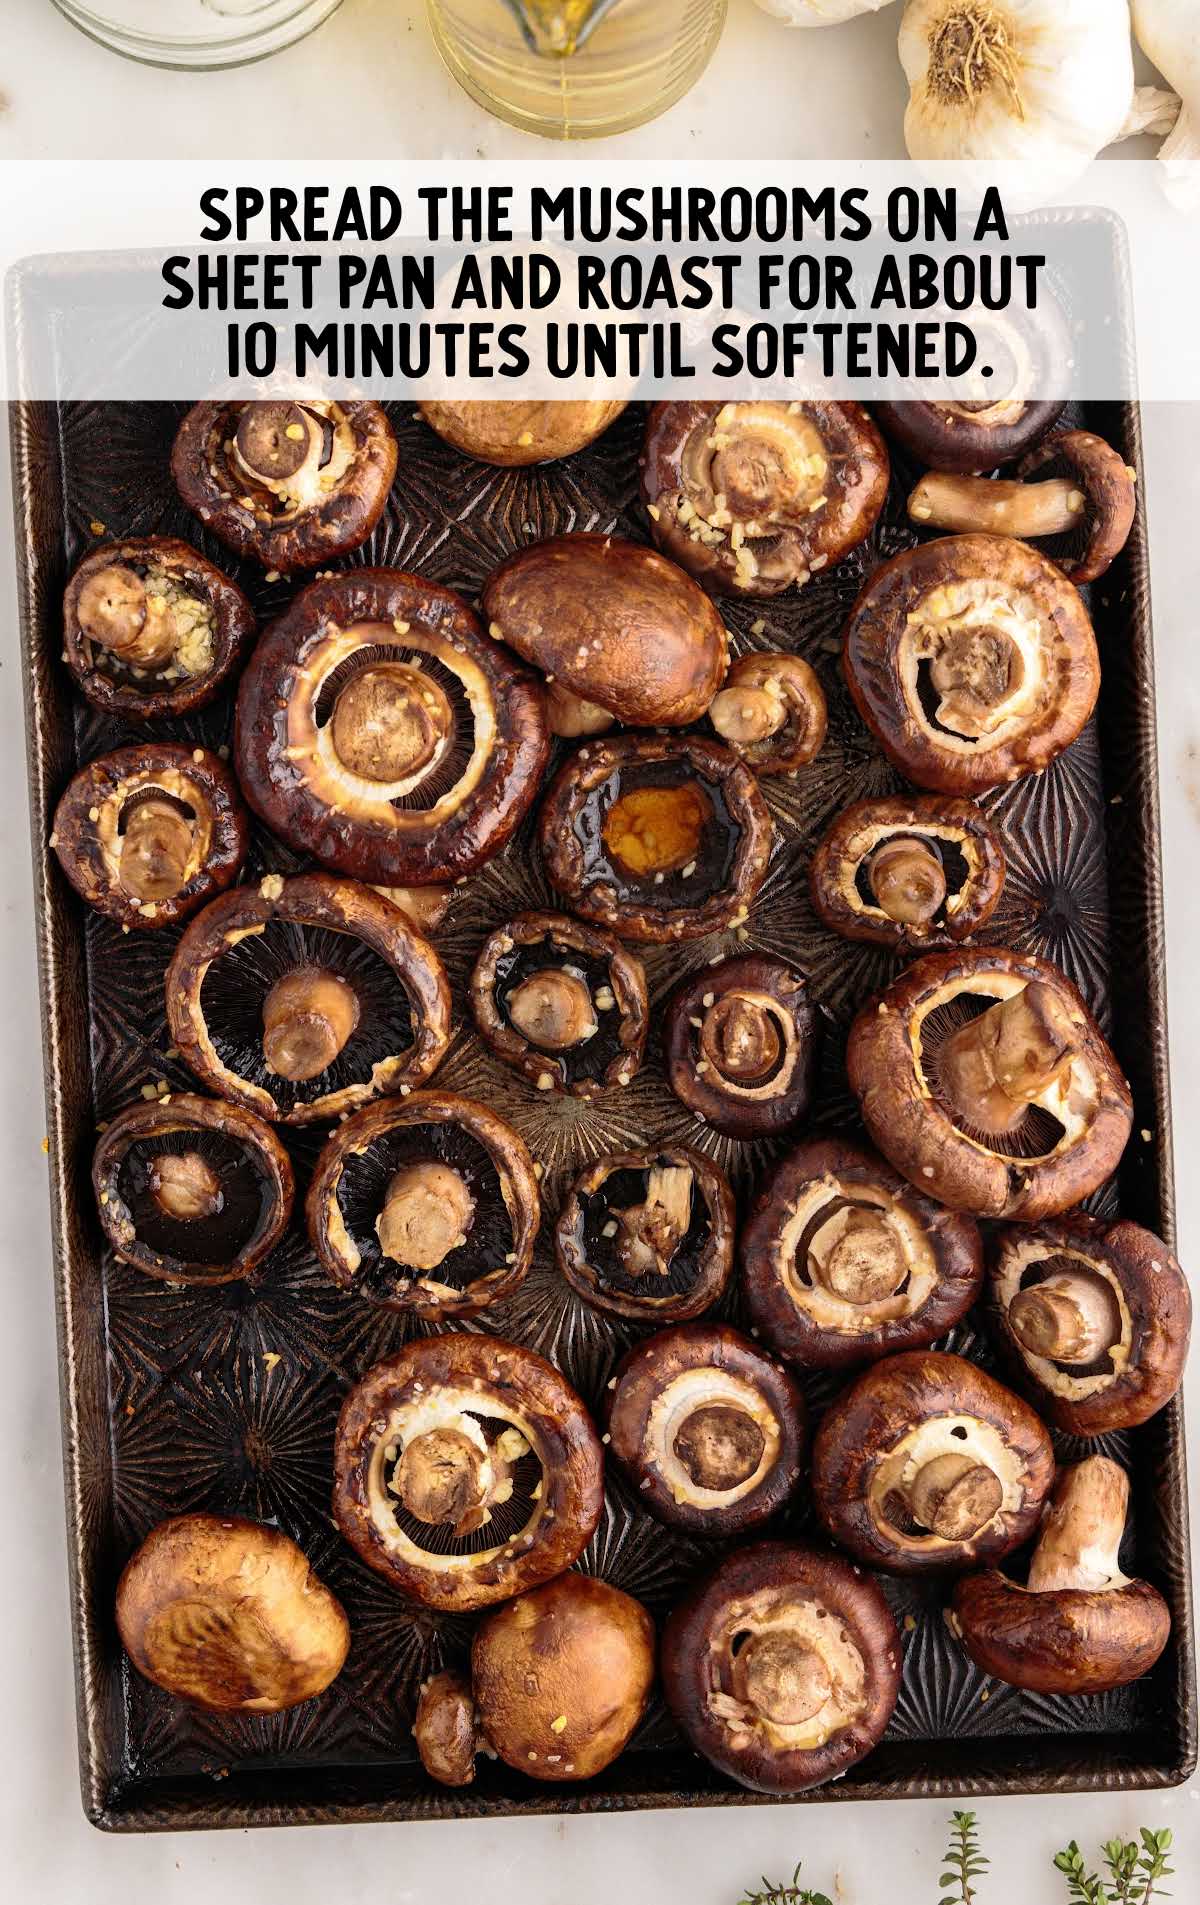 mushrooms spread on a sheet and roasted